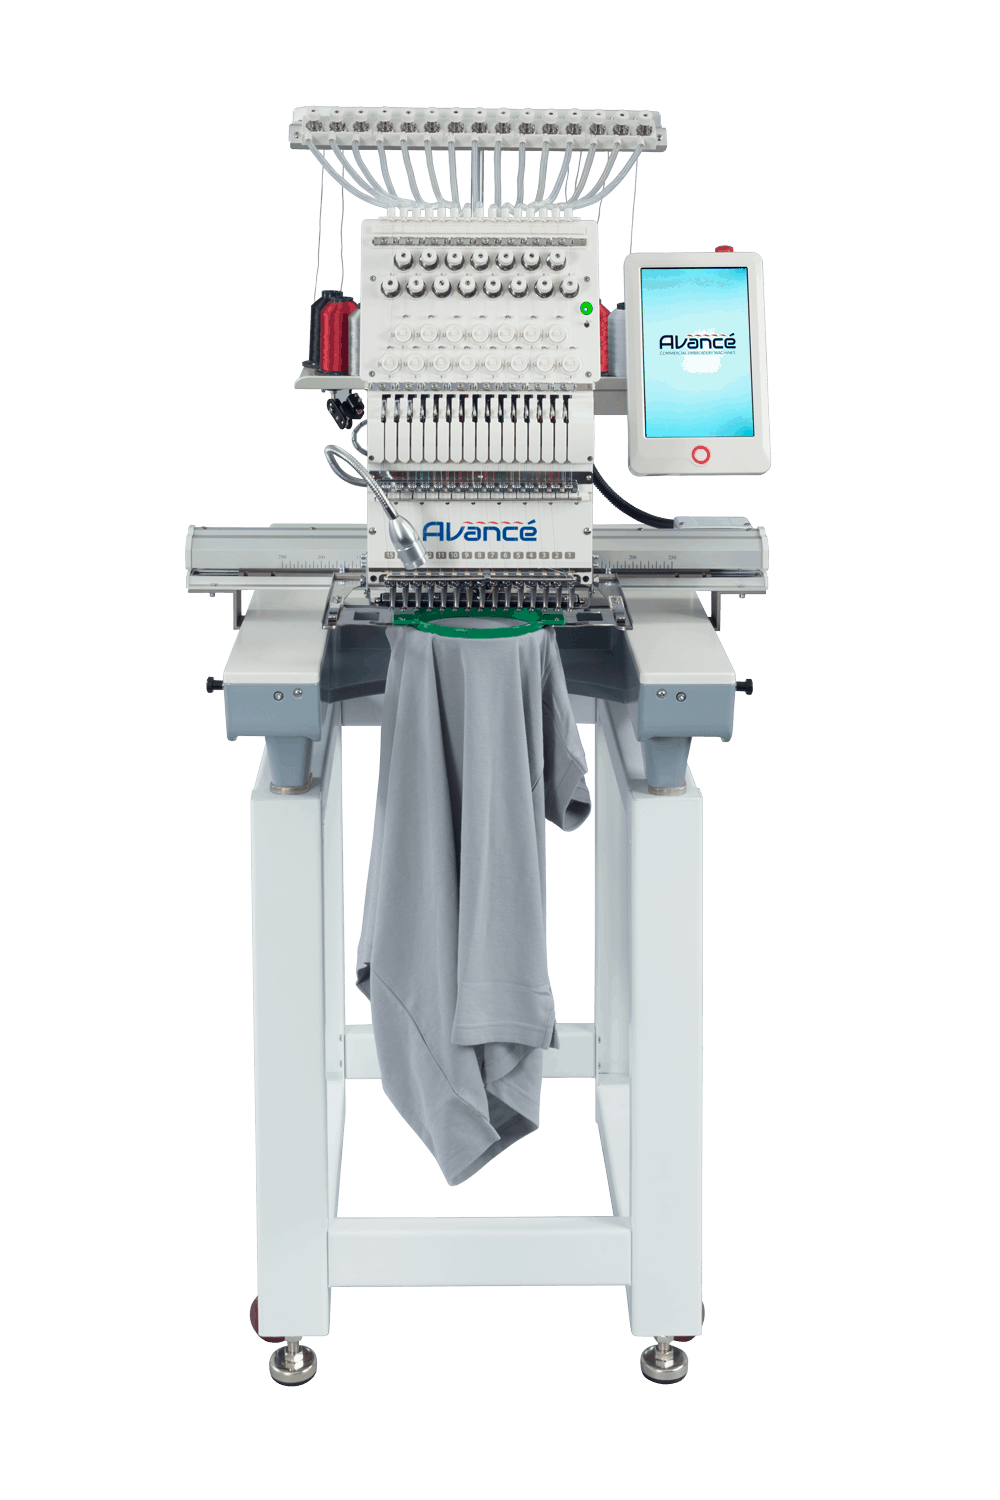 swf 1501c compact embroidery machine price